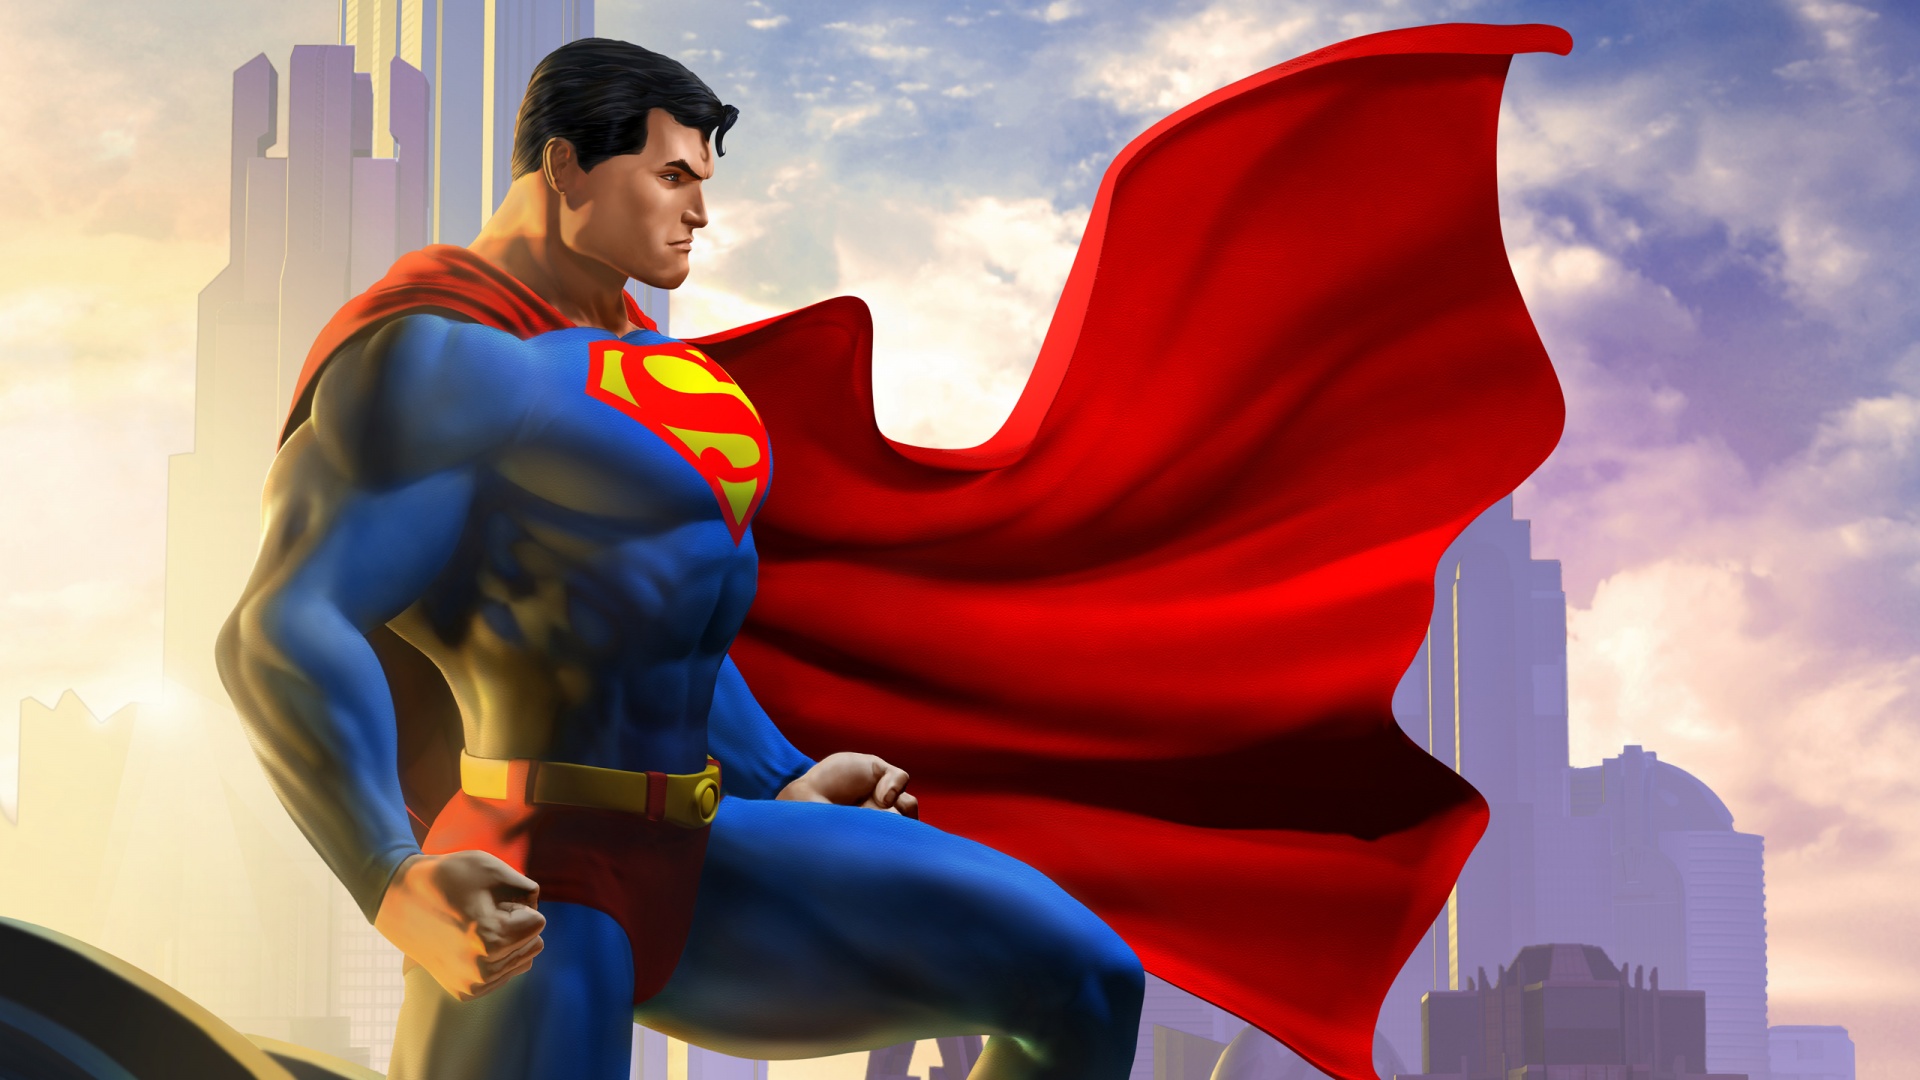 Superman-Wallpaper-Backgrounds-HD-Free-Download-02